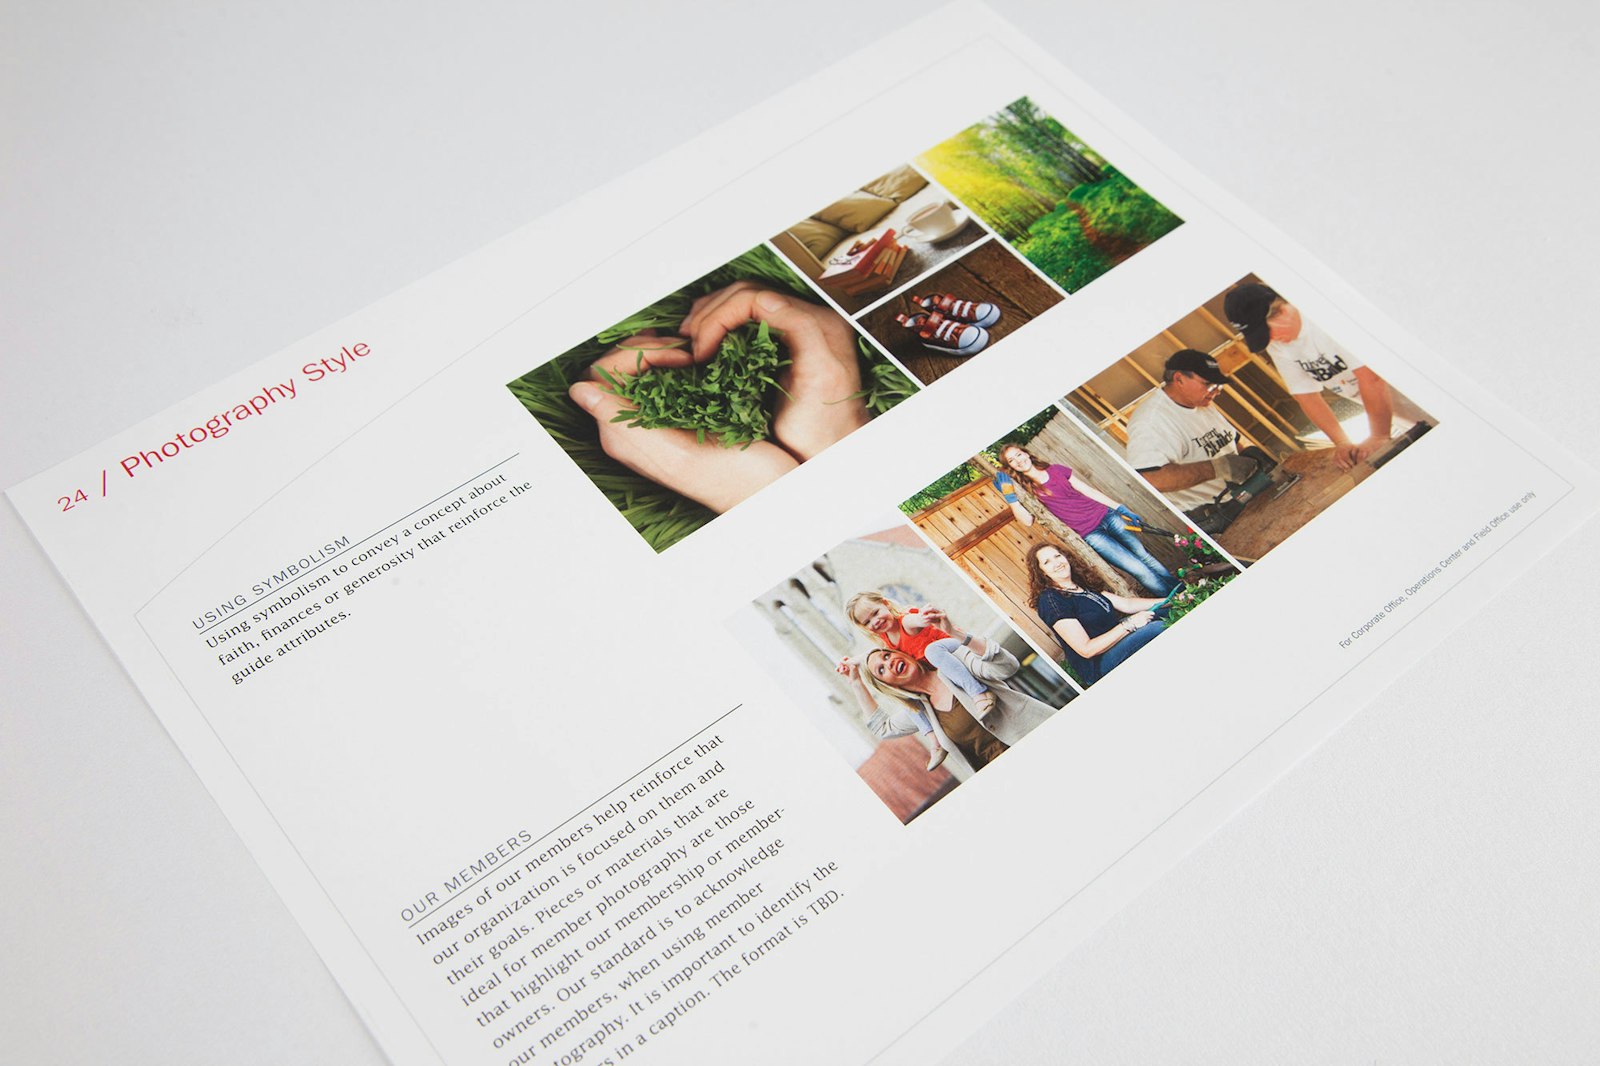 Interior pages of brand guidelines for Thrivent Financial showing the photography style standards.